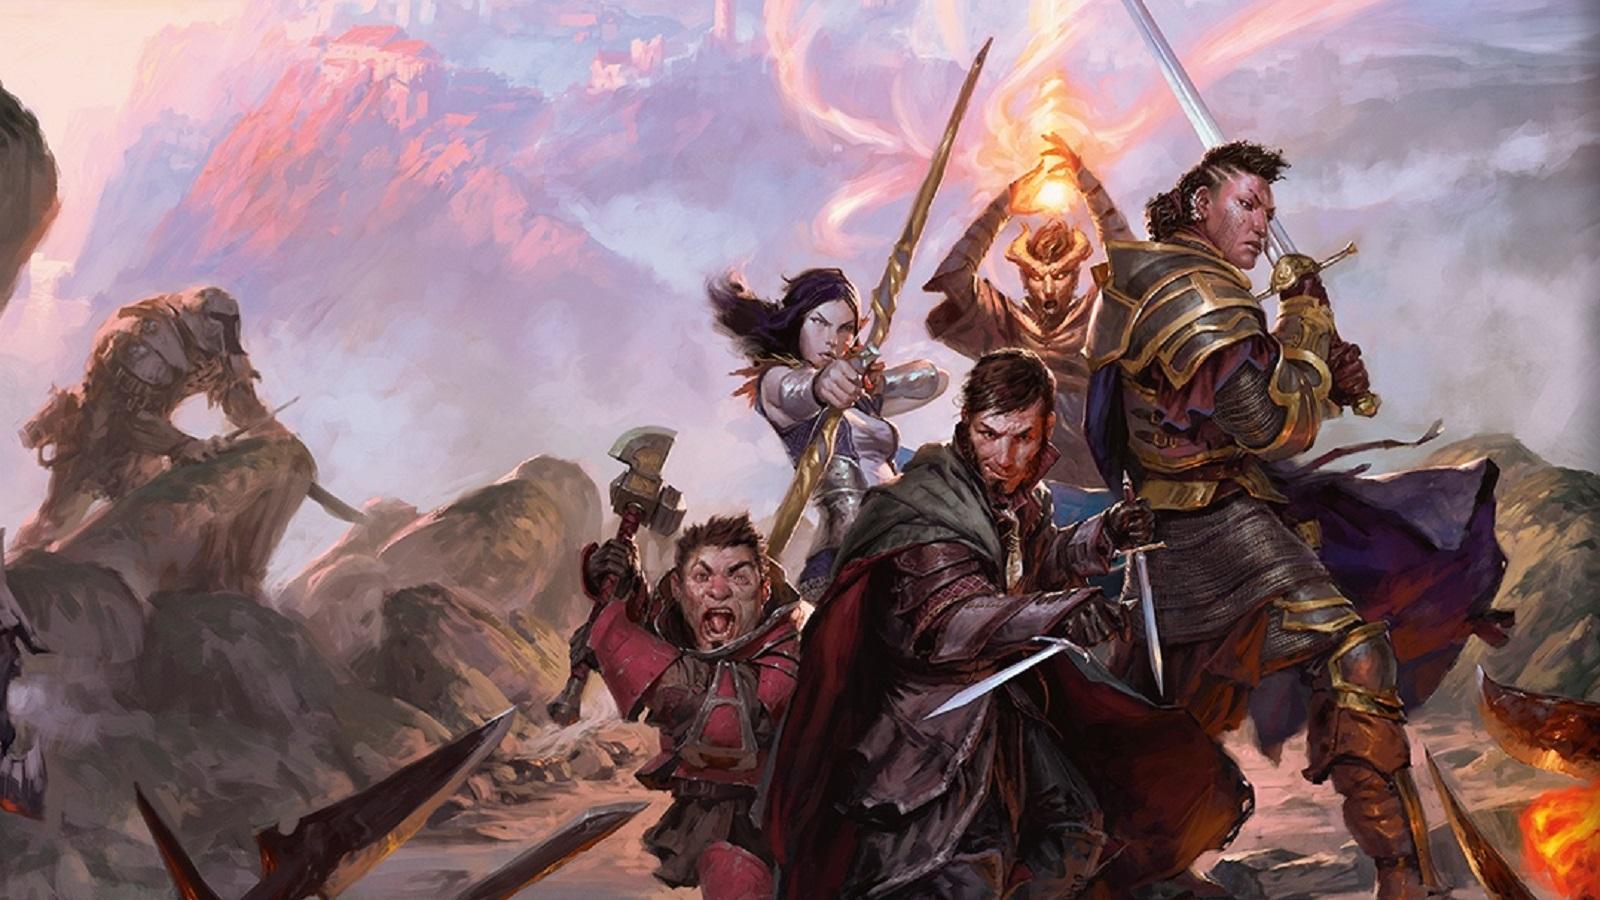 Dungeons & Dragons OGL will remain